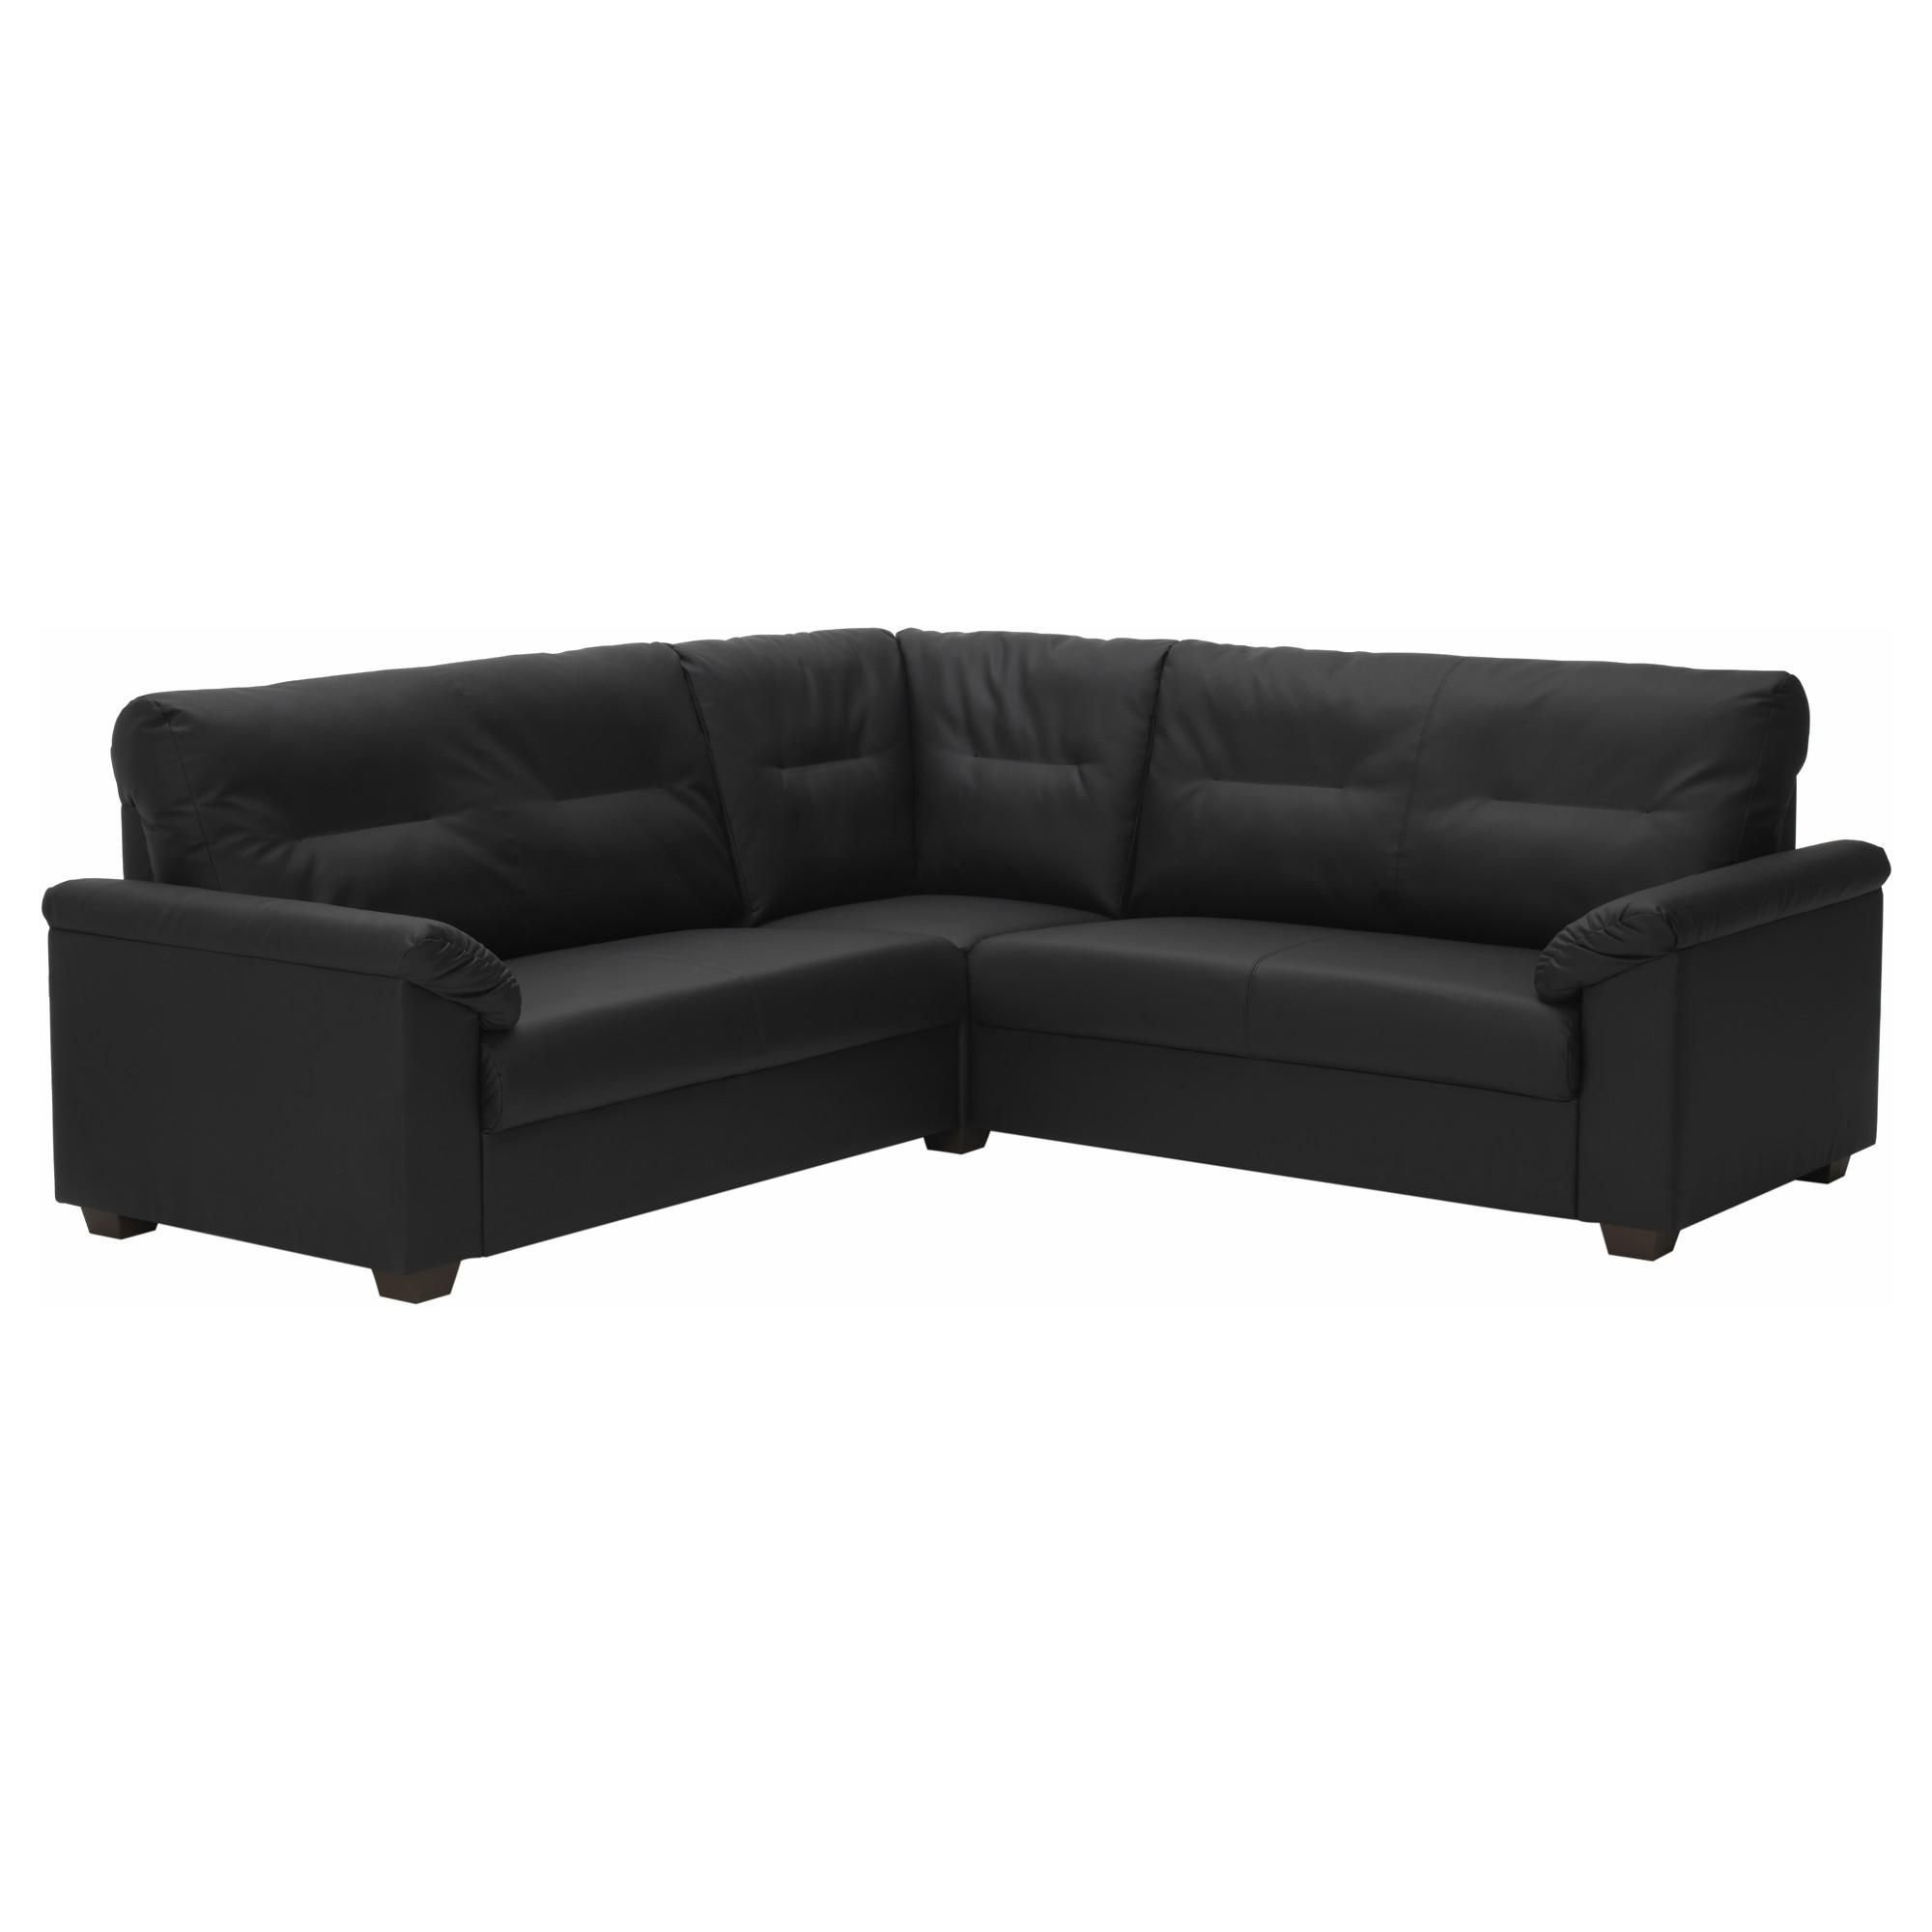 Sofas Center : Black Sectional Sofa Cheap Under With Recliners Within Cheap Black Sofas (View 15 of 20)